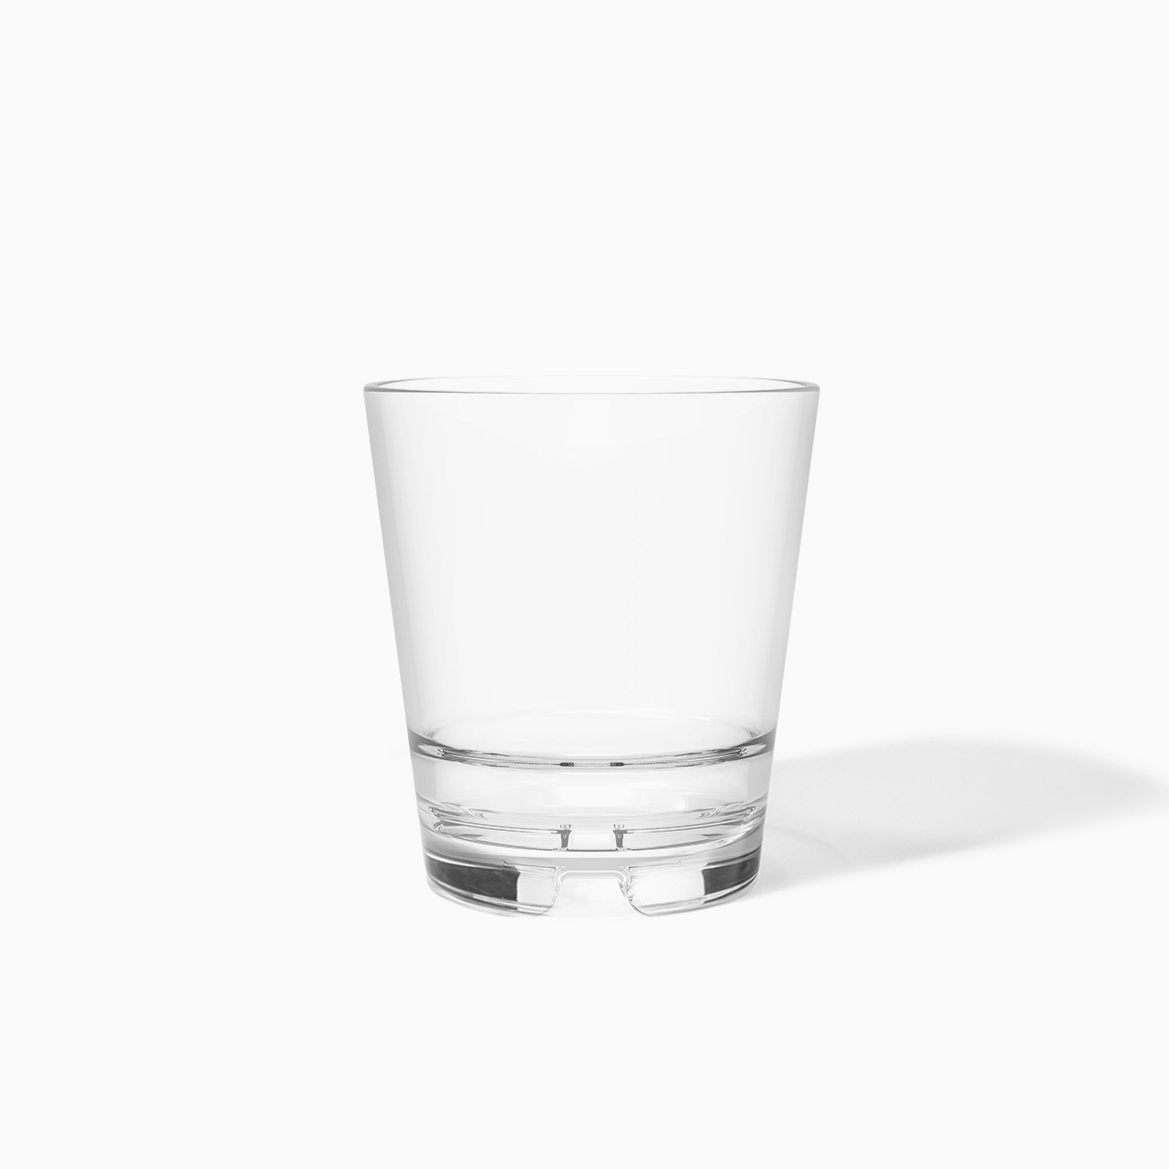 https://cdn.shopify.com/s/files/1/0275/1876/3088/products/reserve-12oz-stackable-double-old-fashioned-tritan-copolyester-glass-772927_1445x.jpg?v=1693016894